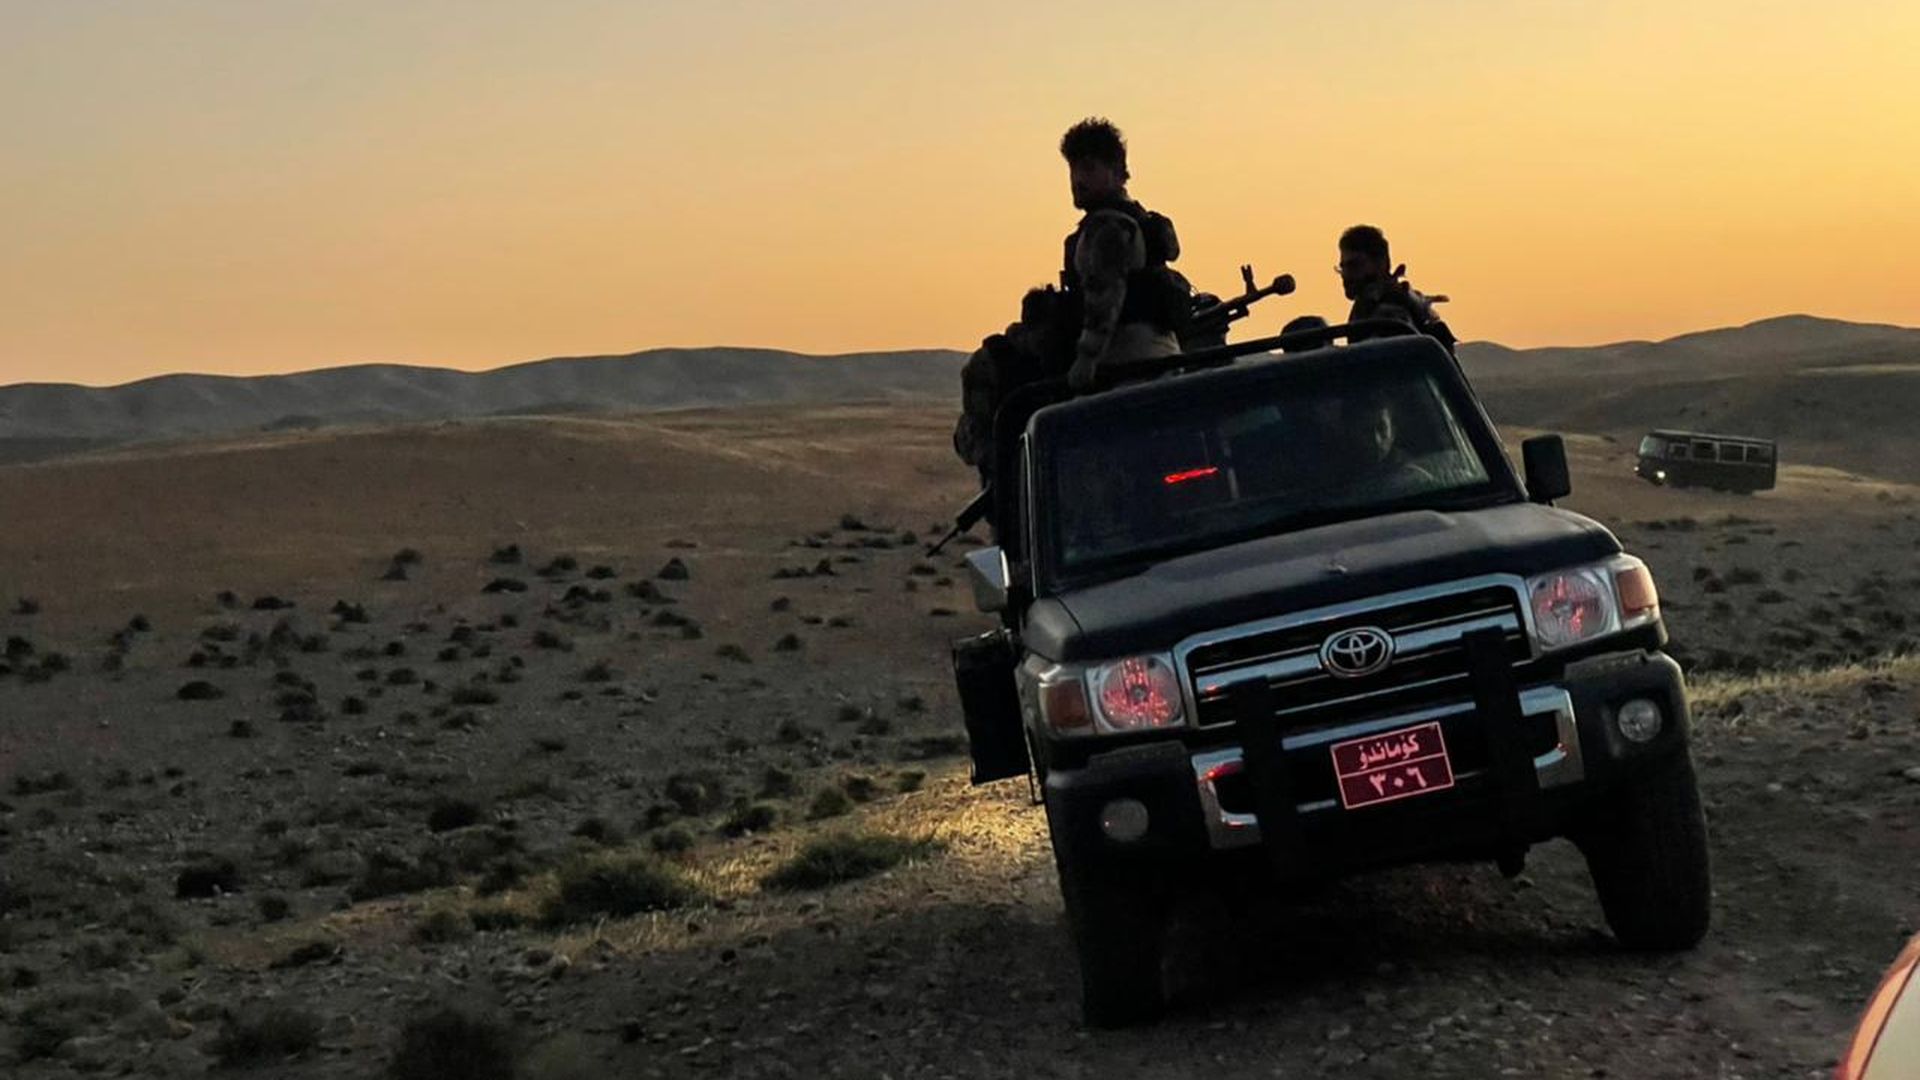 Photo of a military vehicle with soldiers sitting in it as it drives in a desert area